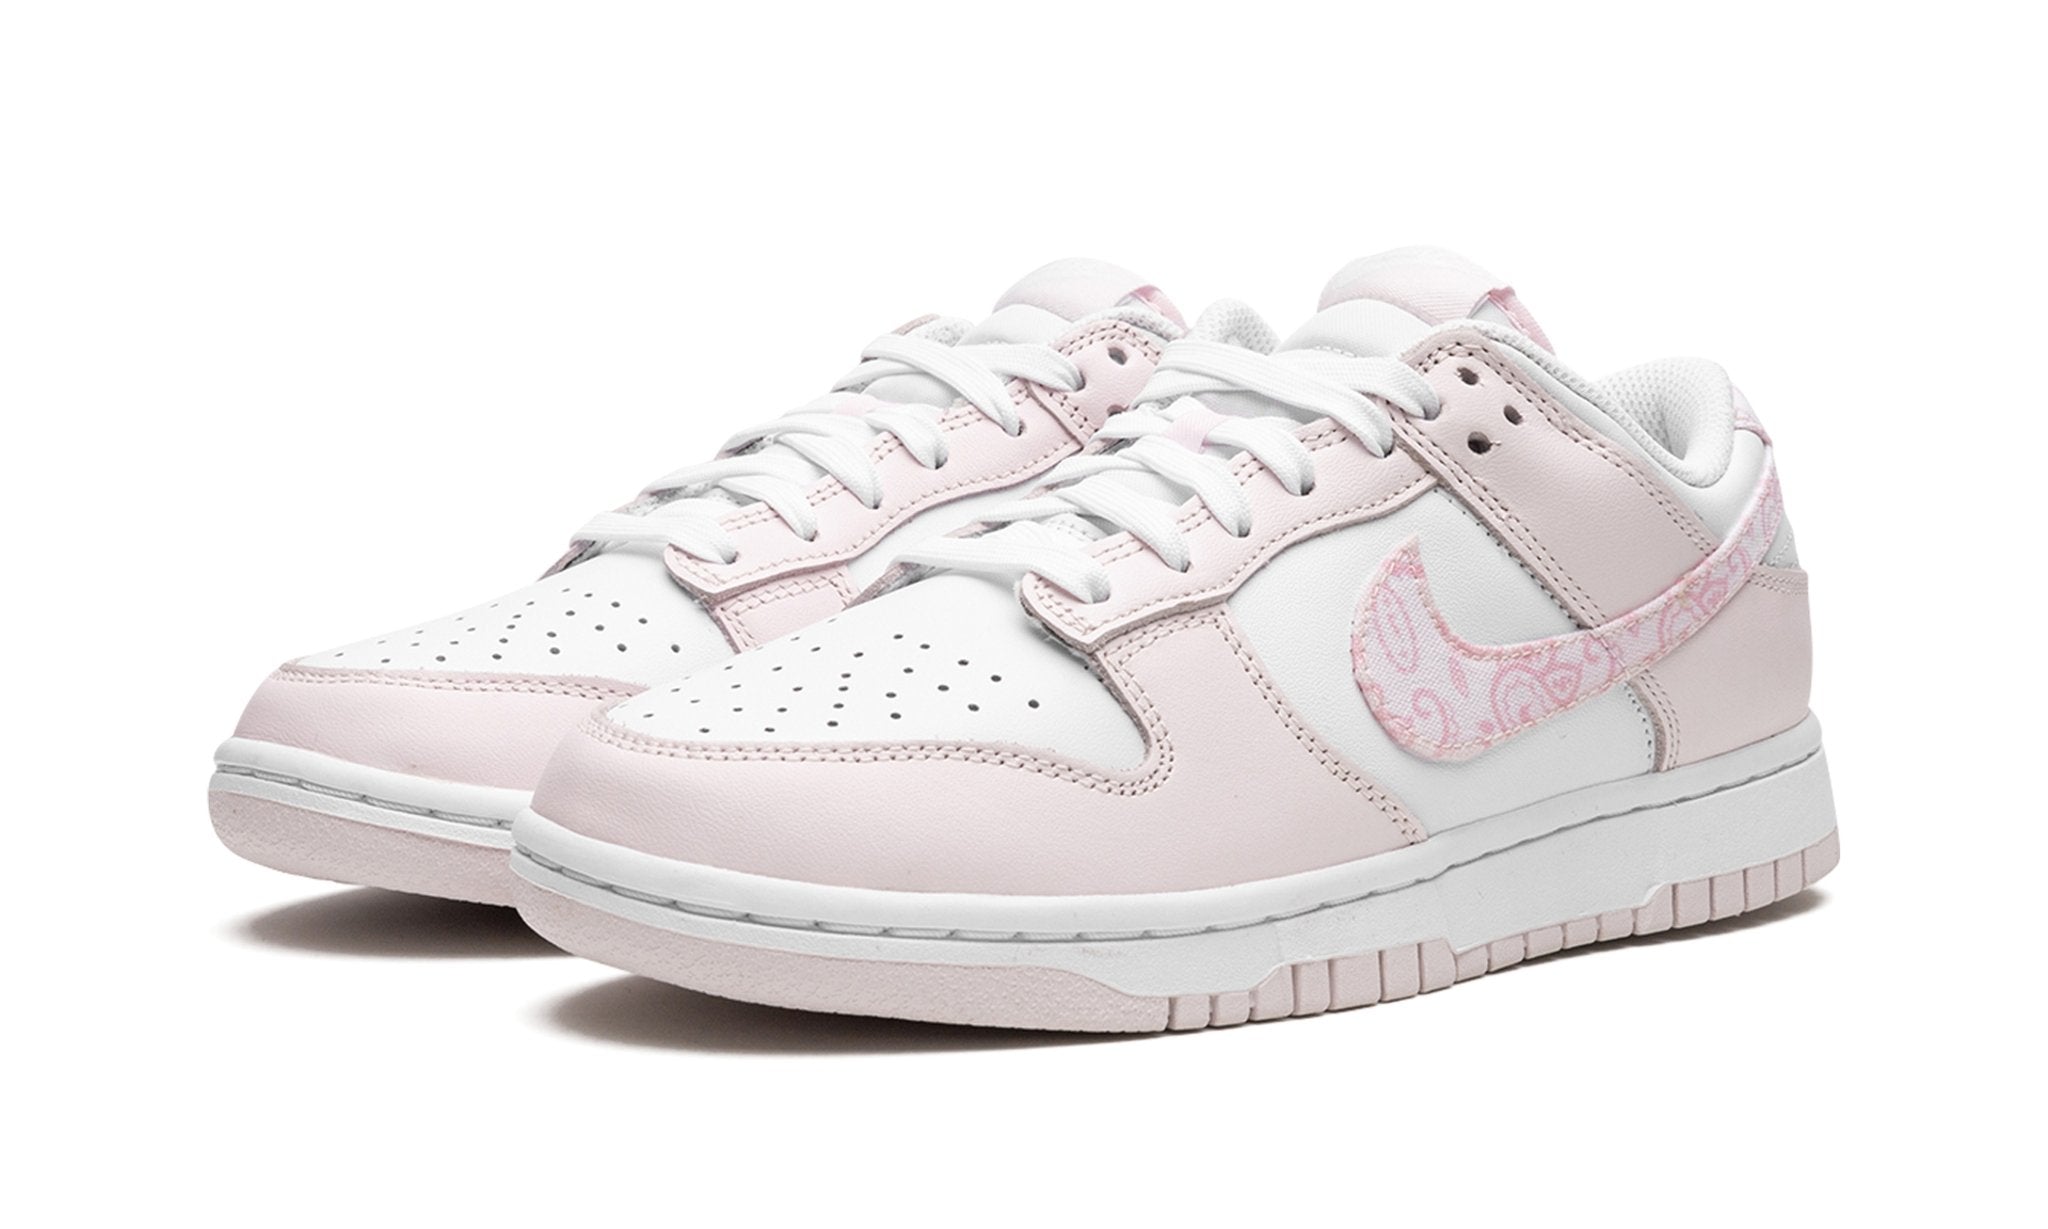 Nike Dunk Low Essentials Paisley Pack “Pink” (WMNS)